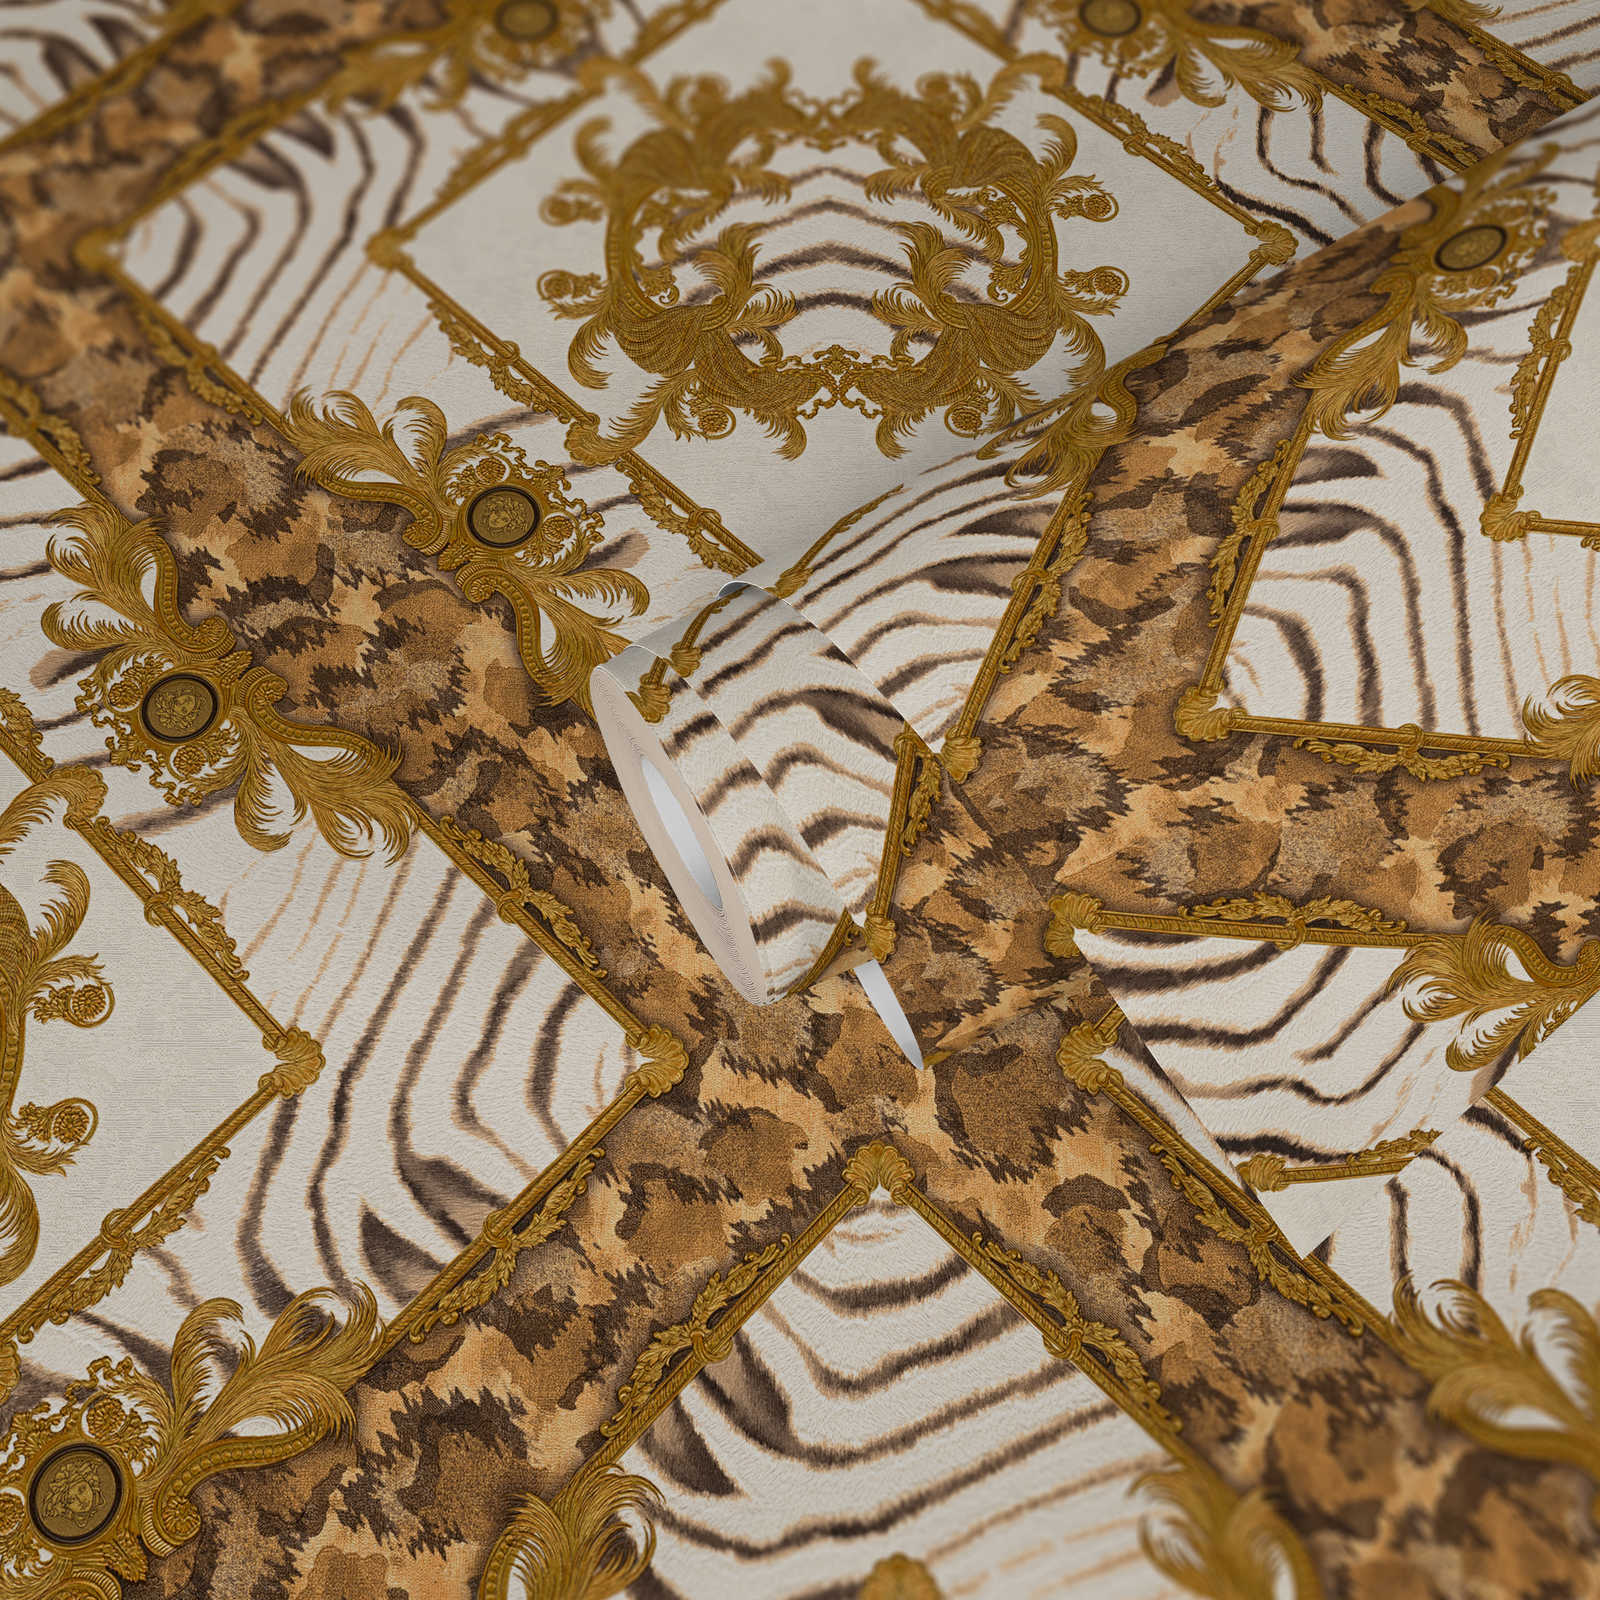             Wallpaper by VERSACE with Animal Print Design - Brown, Cream
        